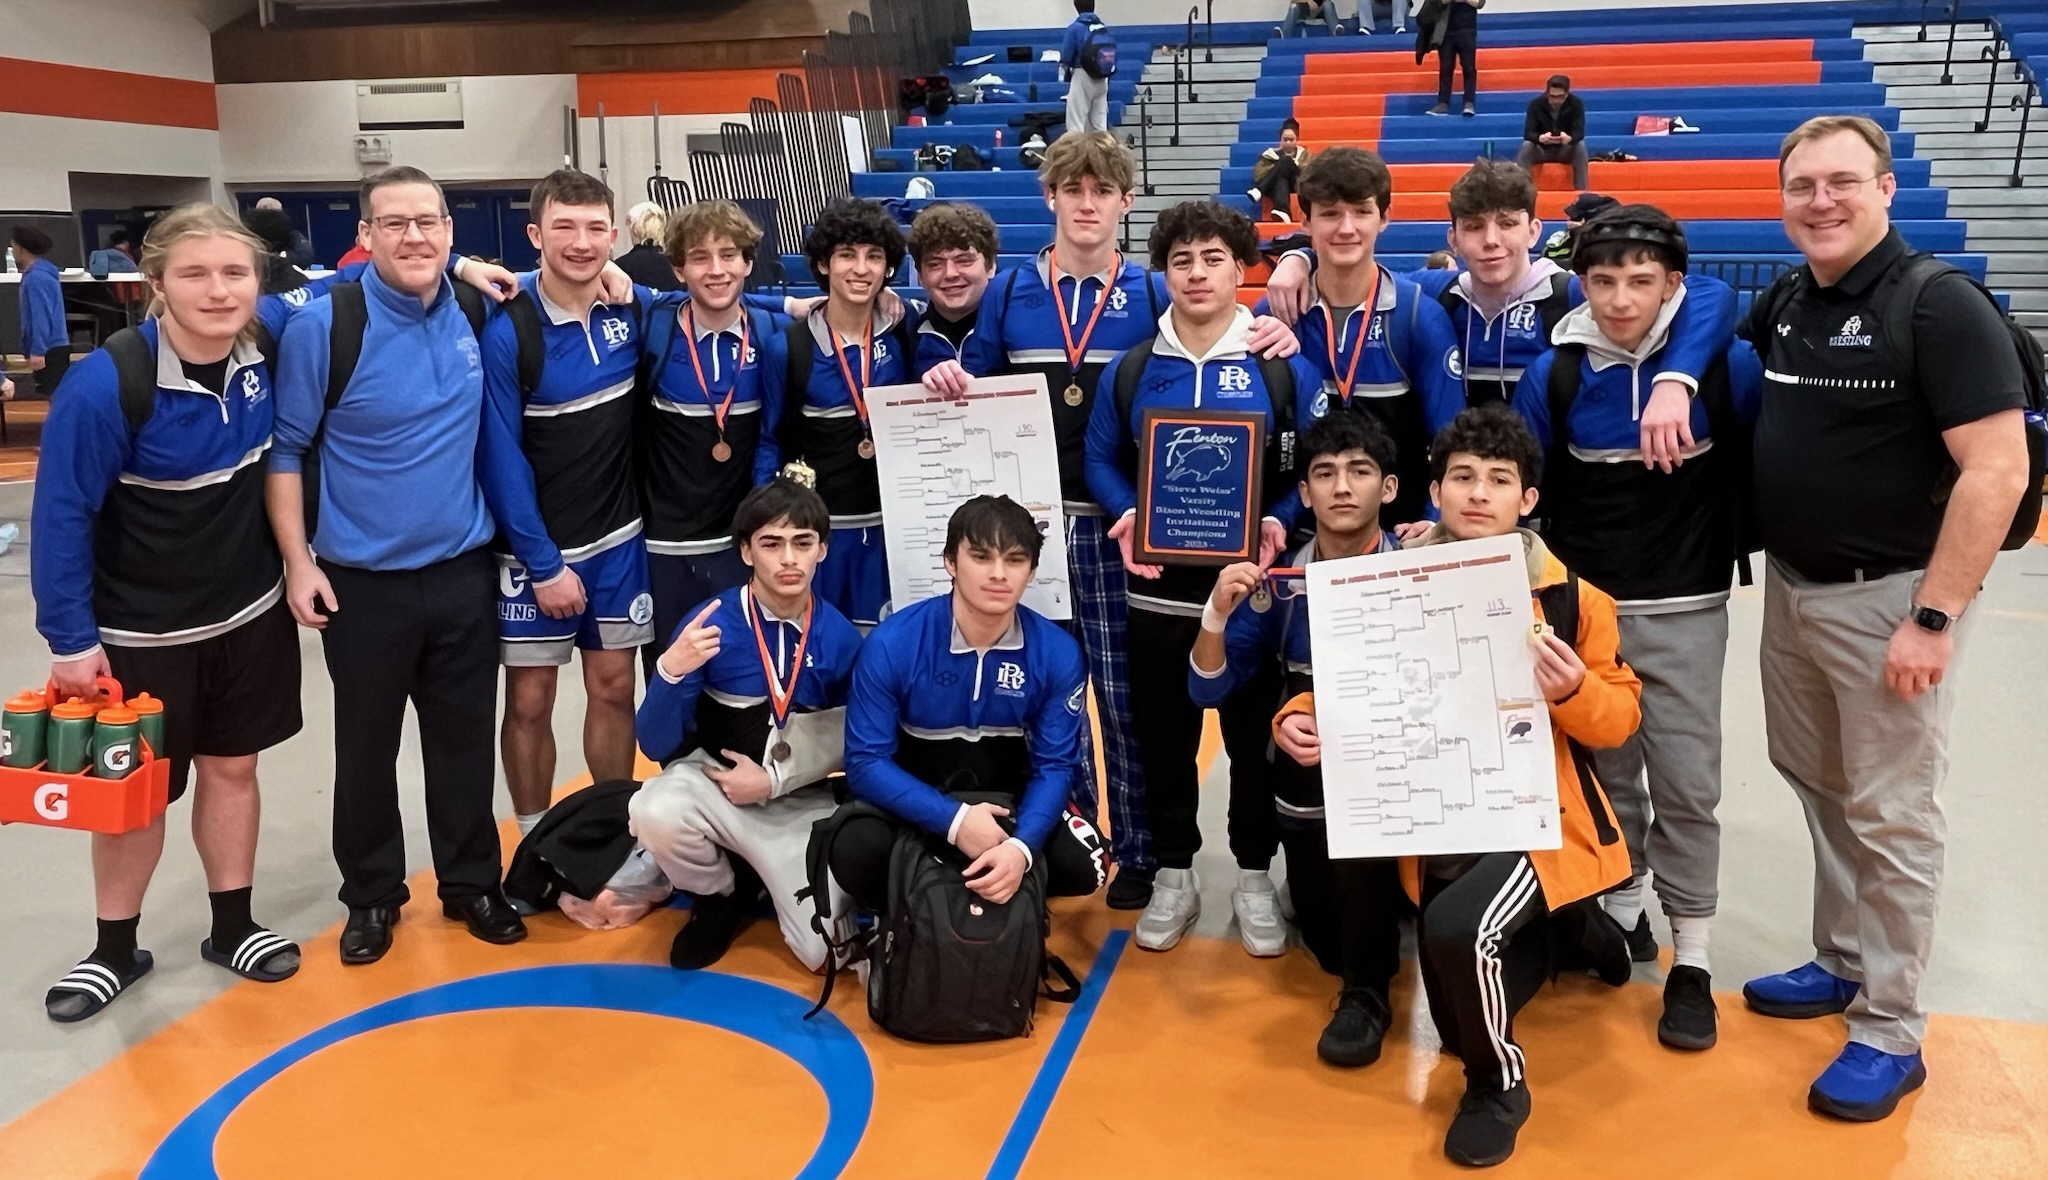 3rd time's the charm for RiversideBrookfield at Fenton Illinois